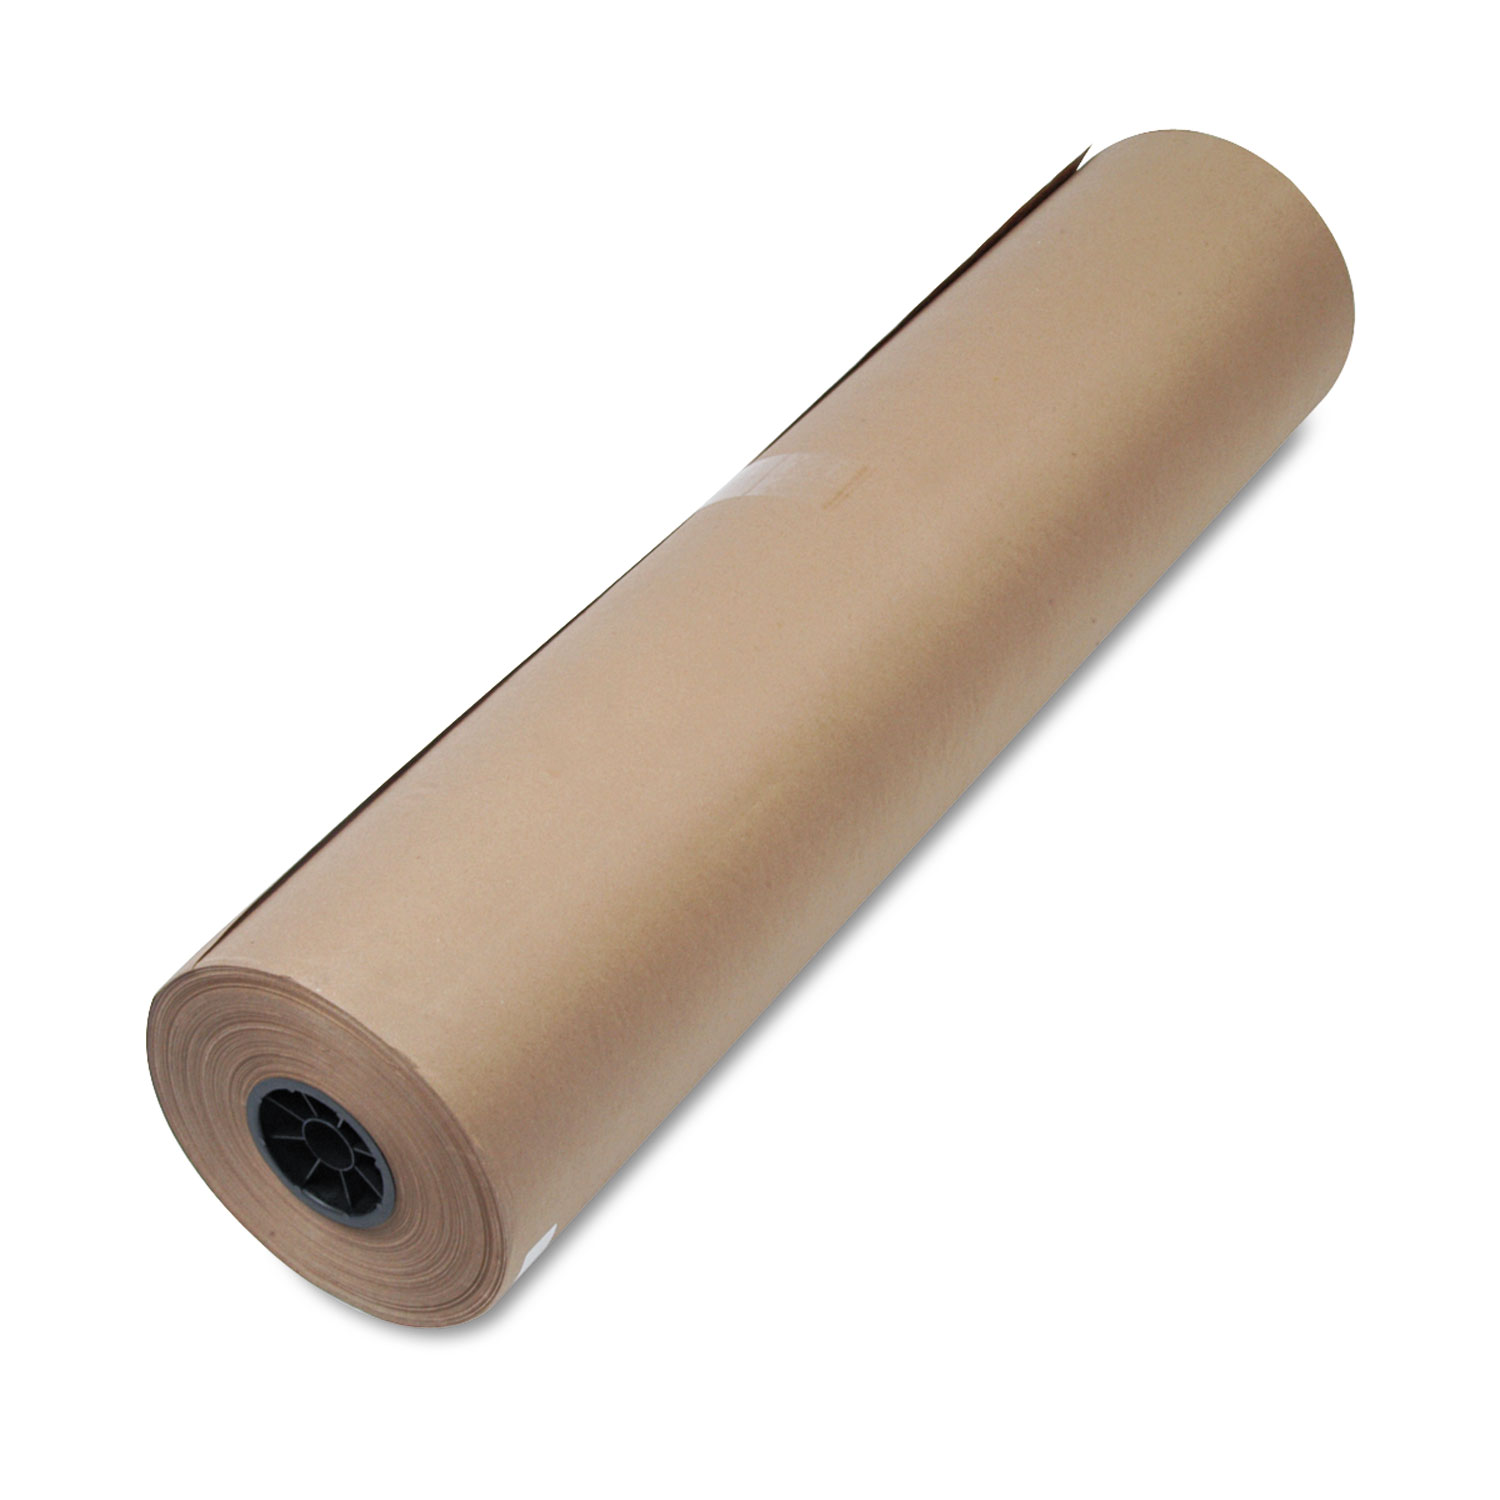  General Supply UFS1300053 High-Volume Wrapping Paper, 50lb, 36w, 720'l, Brown (UFS1300053) 